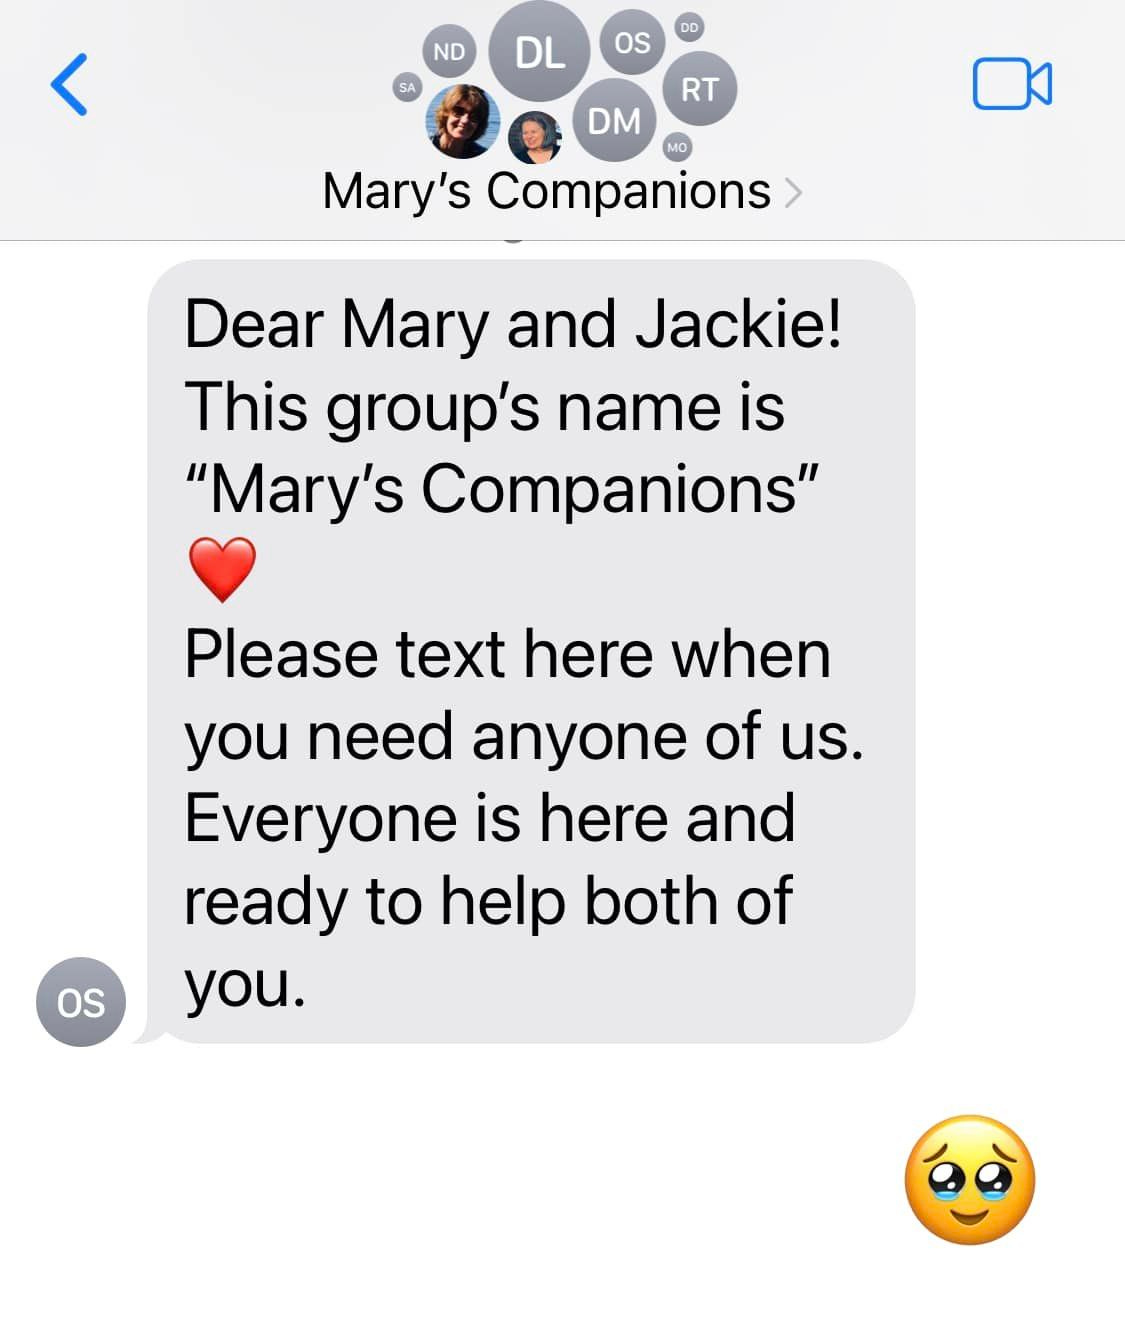 May be an image of 2 people and text that says 'ND DL os RT DM Mary's Companions Dear Mary and Jackie! This group's name is "Mary's Companions" Please text here when you need anyone of us. Everyone is here and ready to help both of you. oS'